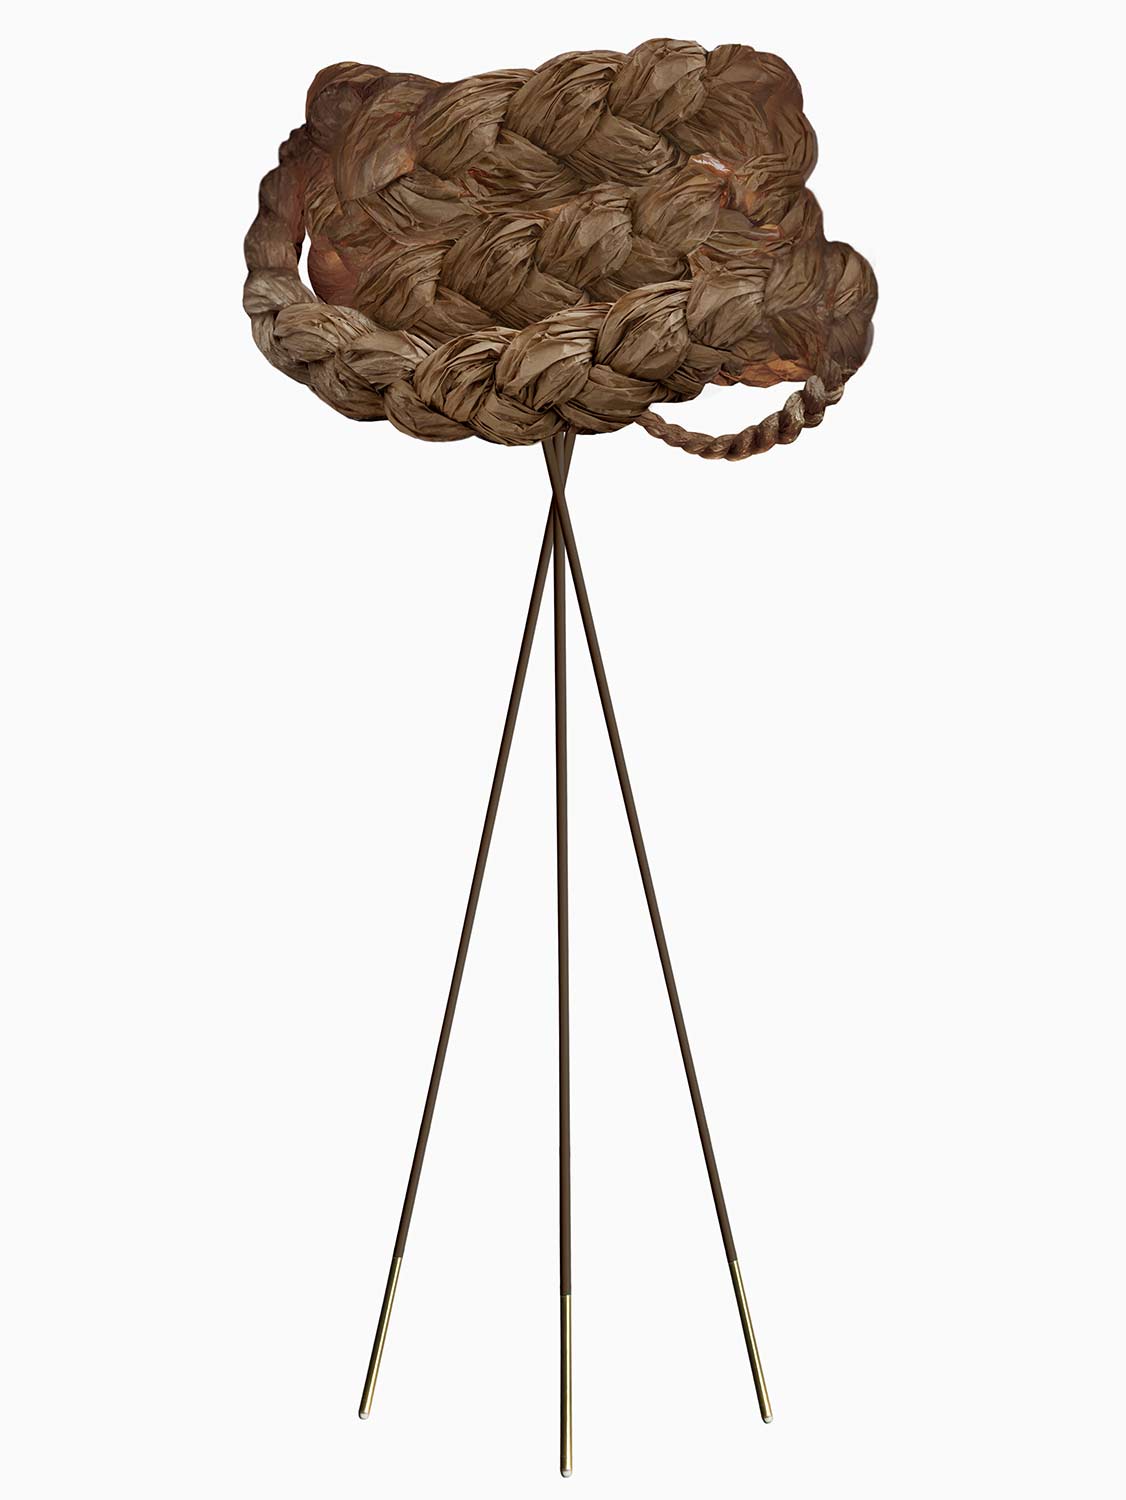 Brown Paper Braided Unique Handmade Floor  Lamp | Cozy Atmosphere Lighting | Contemporary Natural Lighting for Living room,  Bedroom & Lobby | Sustainable Design Lighting | baby & kids room lighting | Natural interior | mammalampa The Bride free-standing lamp L